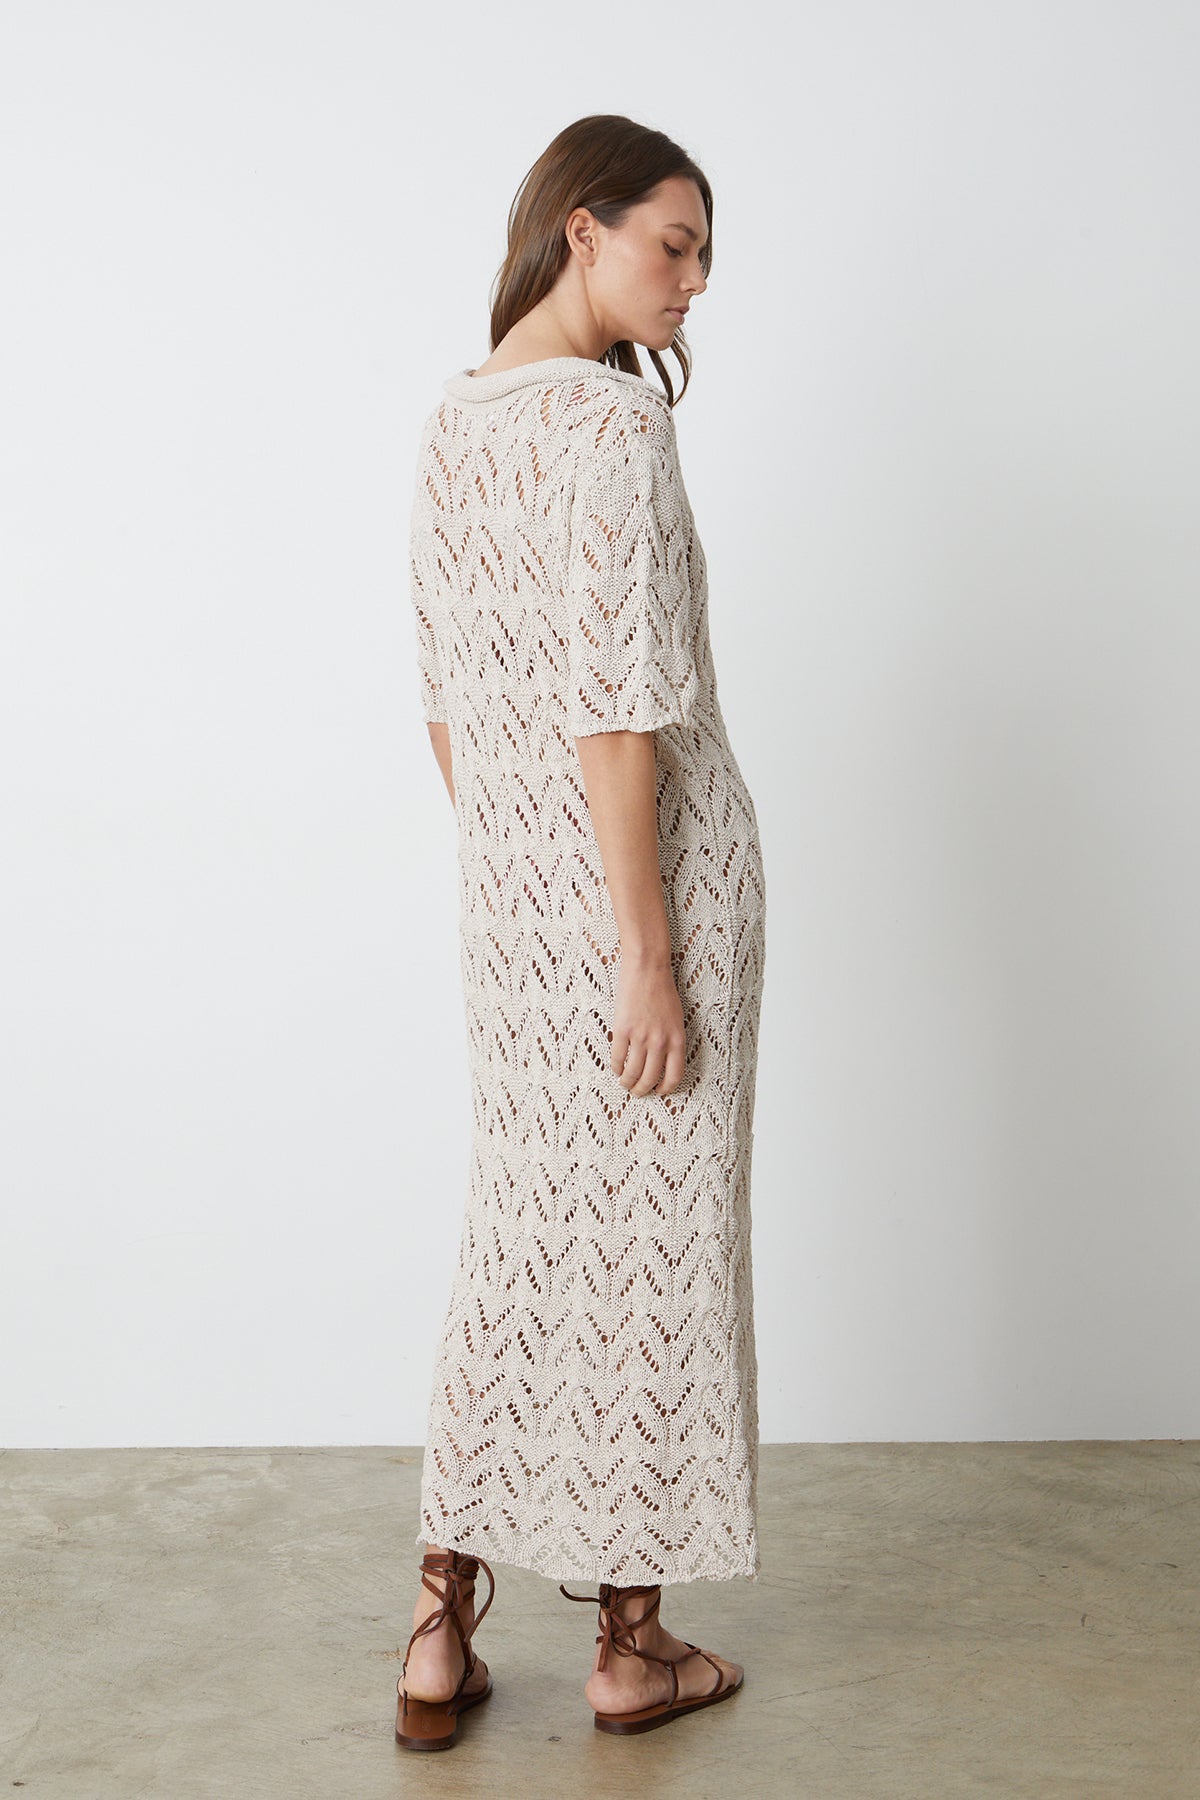 Jacqueline Crochet Stitch Maxi Dress in putty with brown sandals full length back, woman standing with head over shoulder-26296066834625